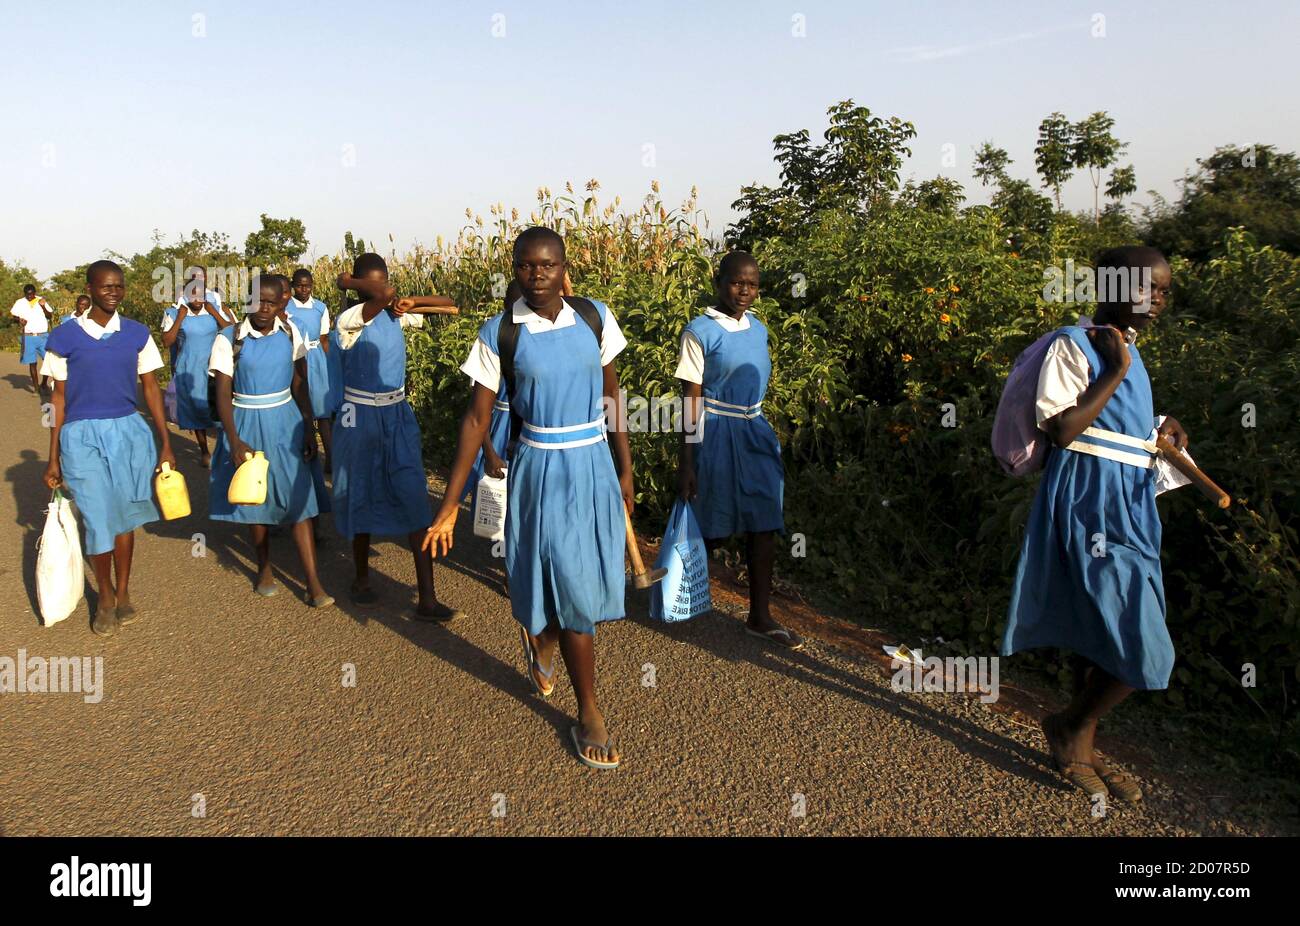 Pupils walk home from the Senator Barack Obama primary school in the U.S. President Barack Obama's ancestral village of Nyang'oma Kogelo, west of Kenya's capital Nairobi, July 14, 2015. President Obama visits Kenya and Ethiopia in July, his third major trip to Sub-Saharan Africa after travelling to Ghana in 2009 and to Tanzania, Senegal and South Africa in 2011. He has also visited Egypt, in North Africa, and South Africa for Nelson Mandela's funeral. Obama will be welcomed by a continent that had expected closer attention from a man they claim as their son, a sentiment felt acutely in the Ken Stock Photo